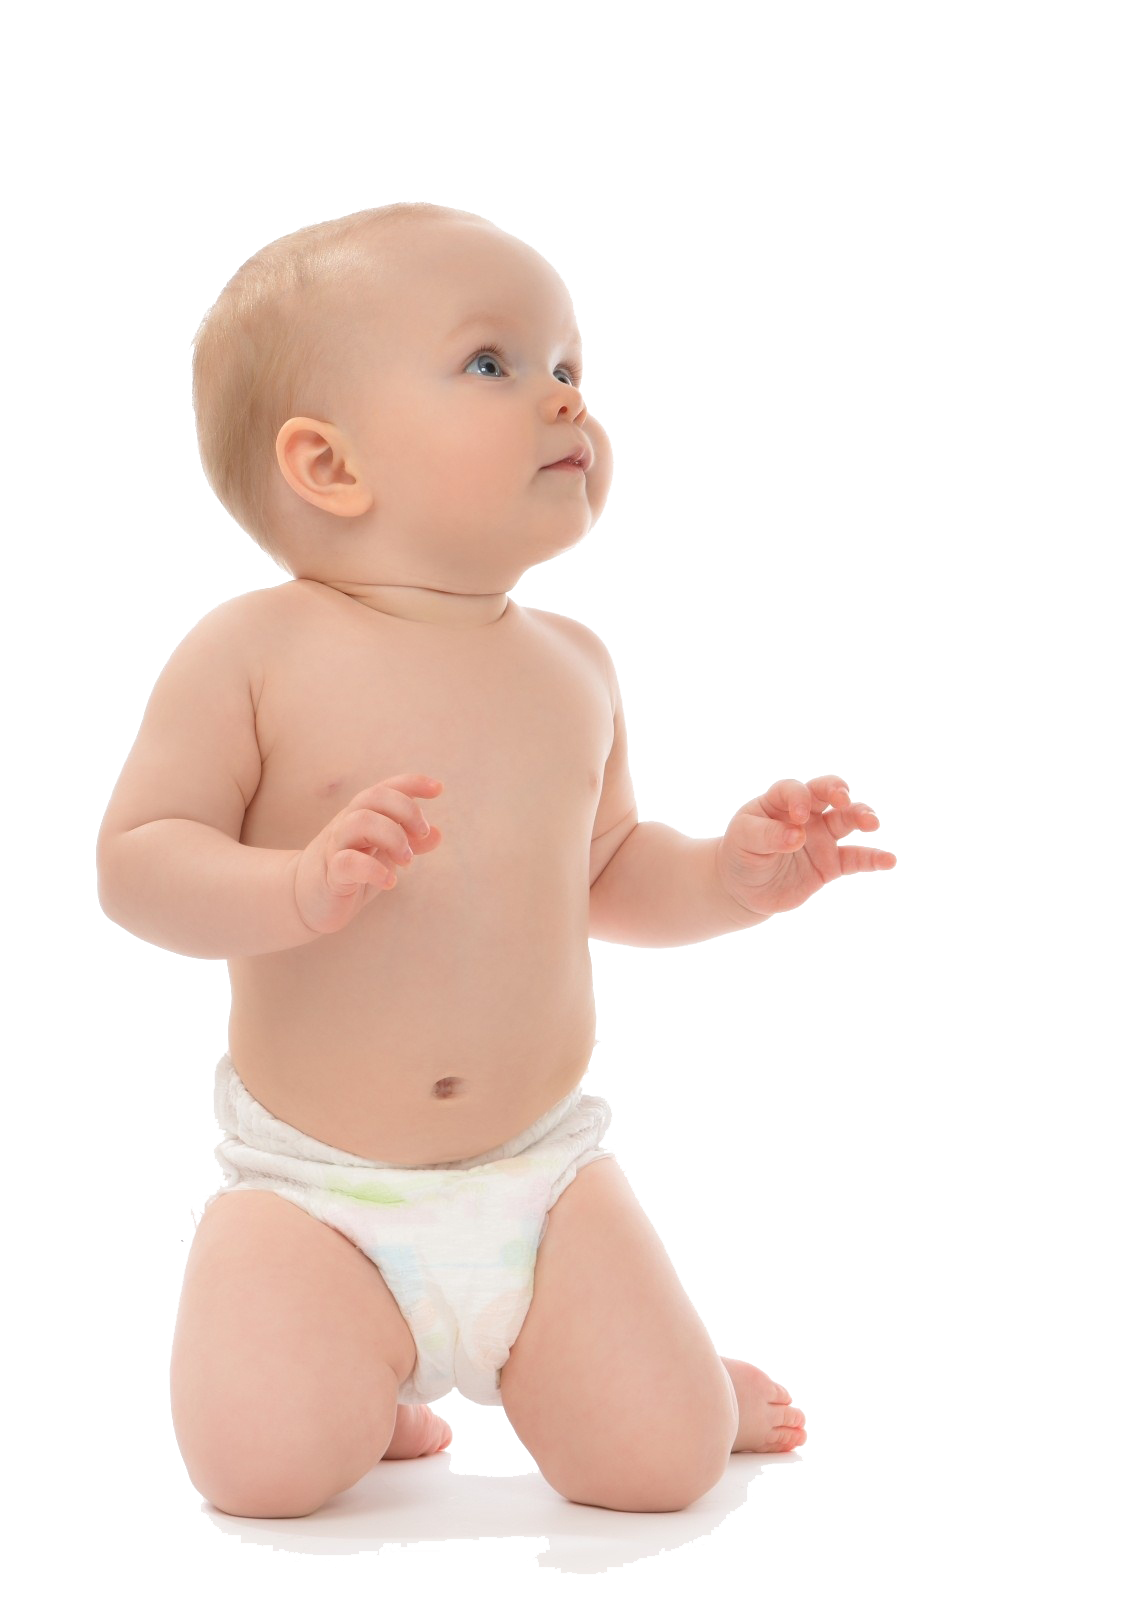 Download PNG image - Little Baby Boy PNG Free Download 